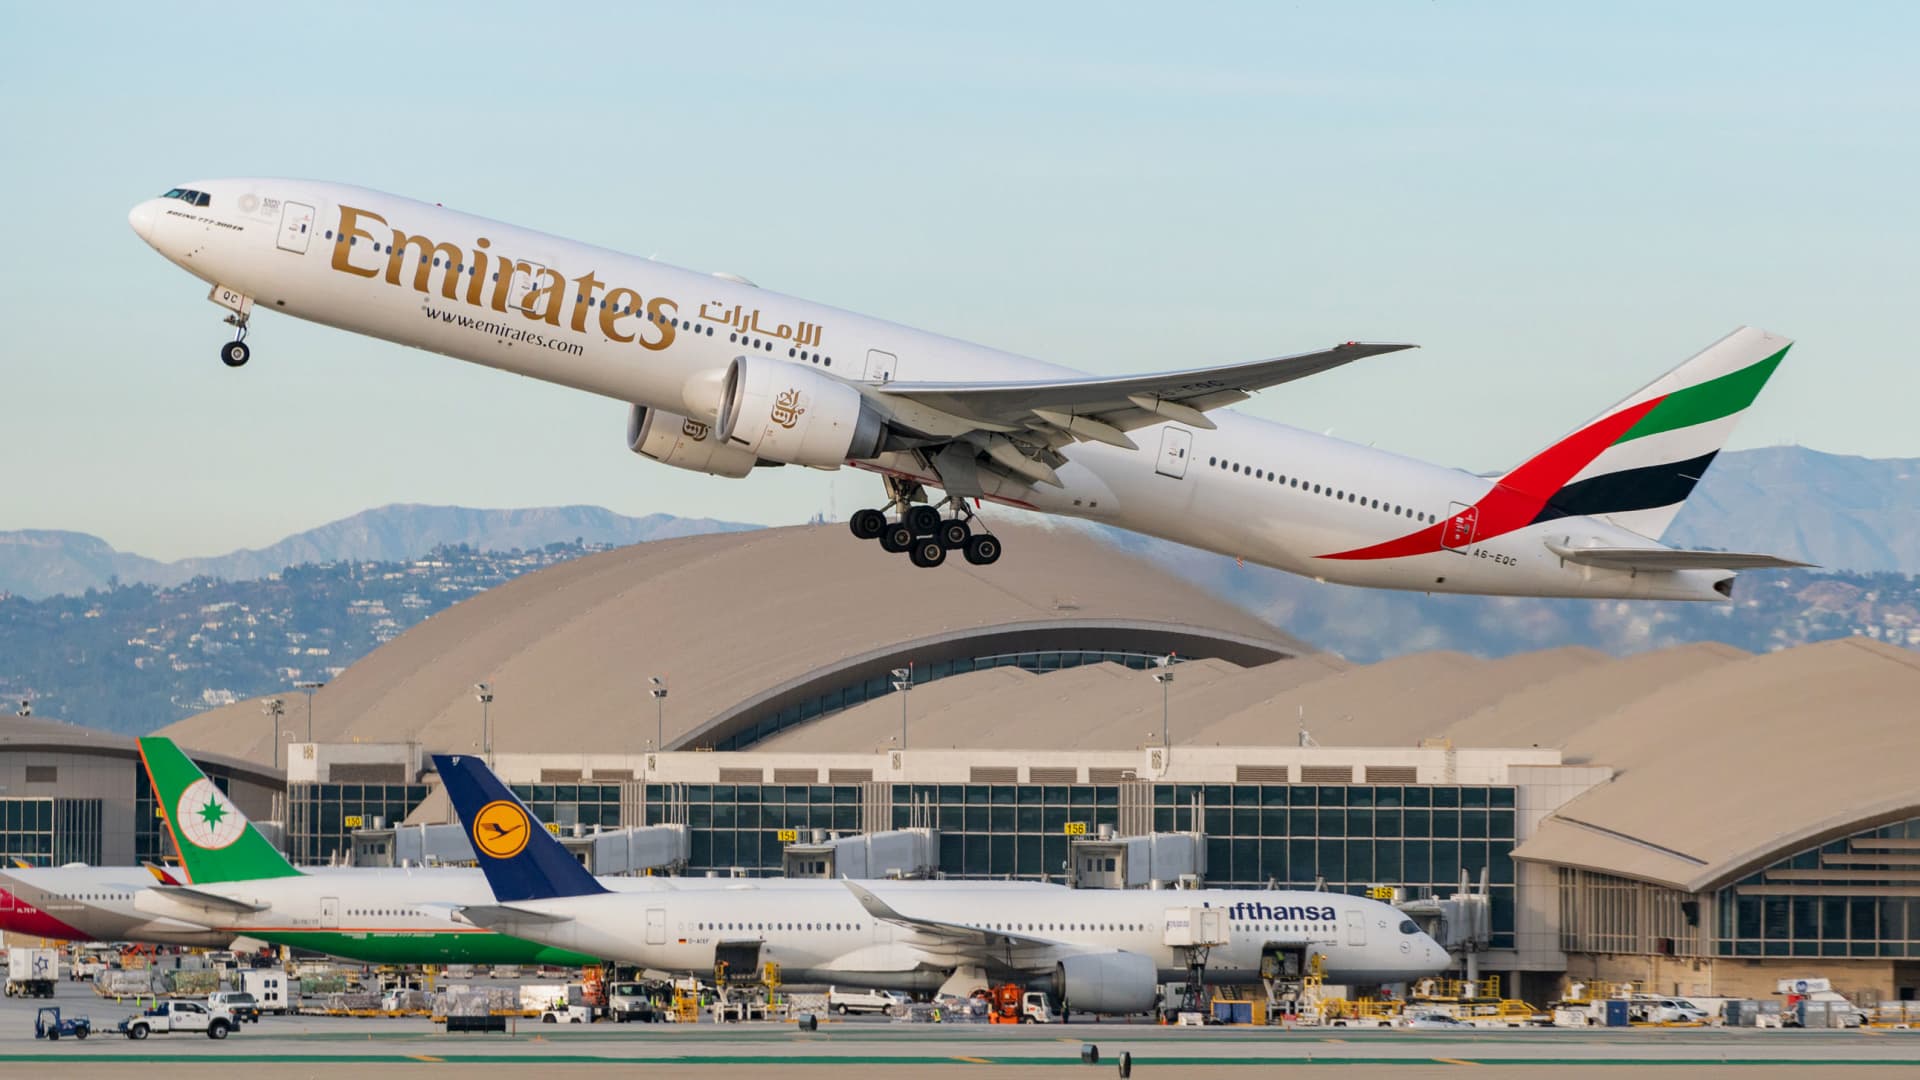 Emirates’ chairman has a information for Boeing: ‘Get your act together’